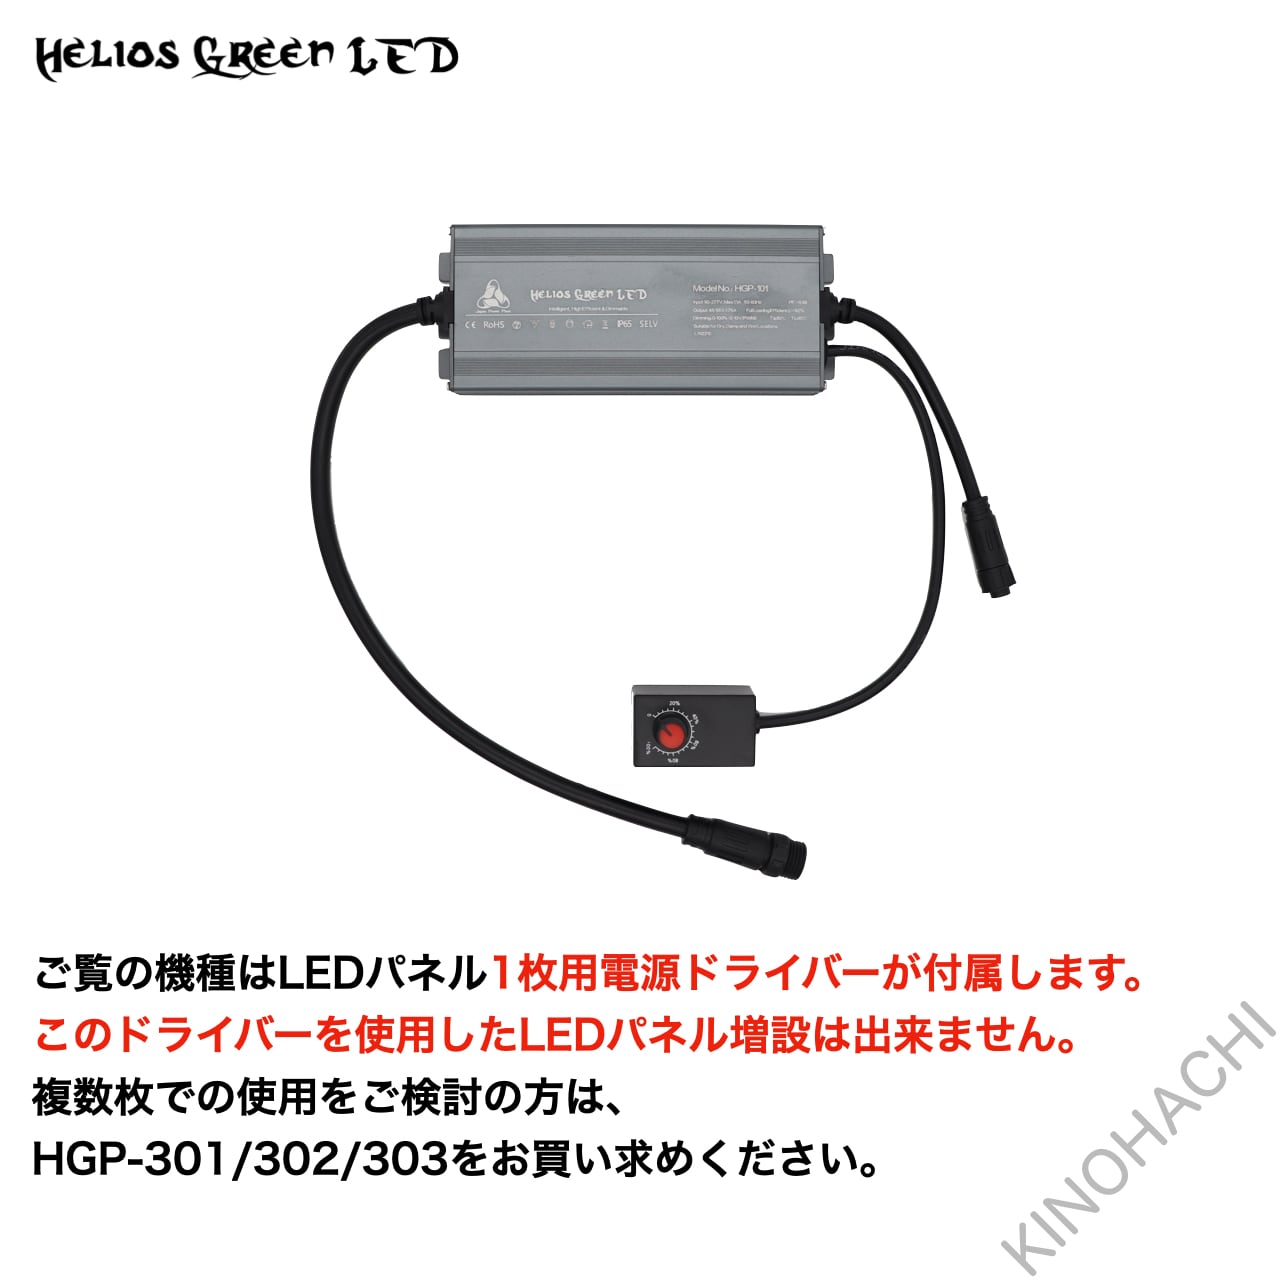 Helios Green LED PRO HGP-101 植物育成ライト ヘリオス | 樹乃鉢 powered by BASE